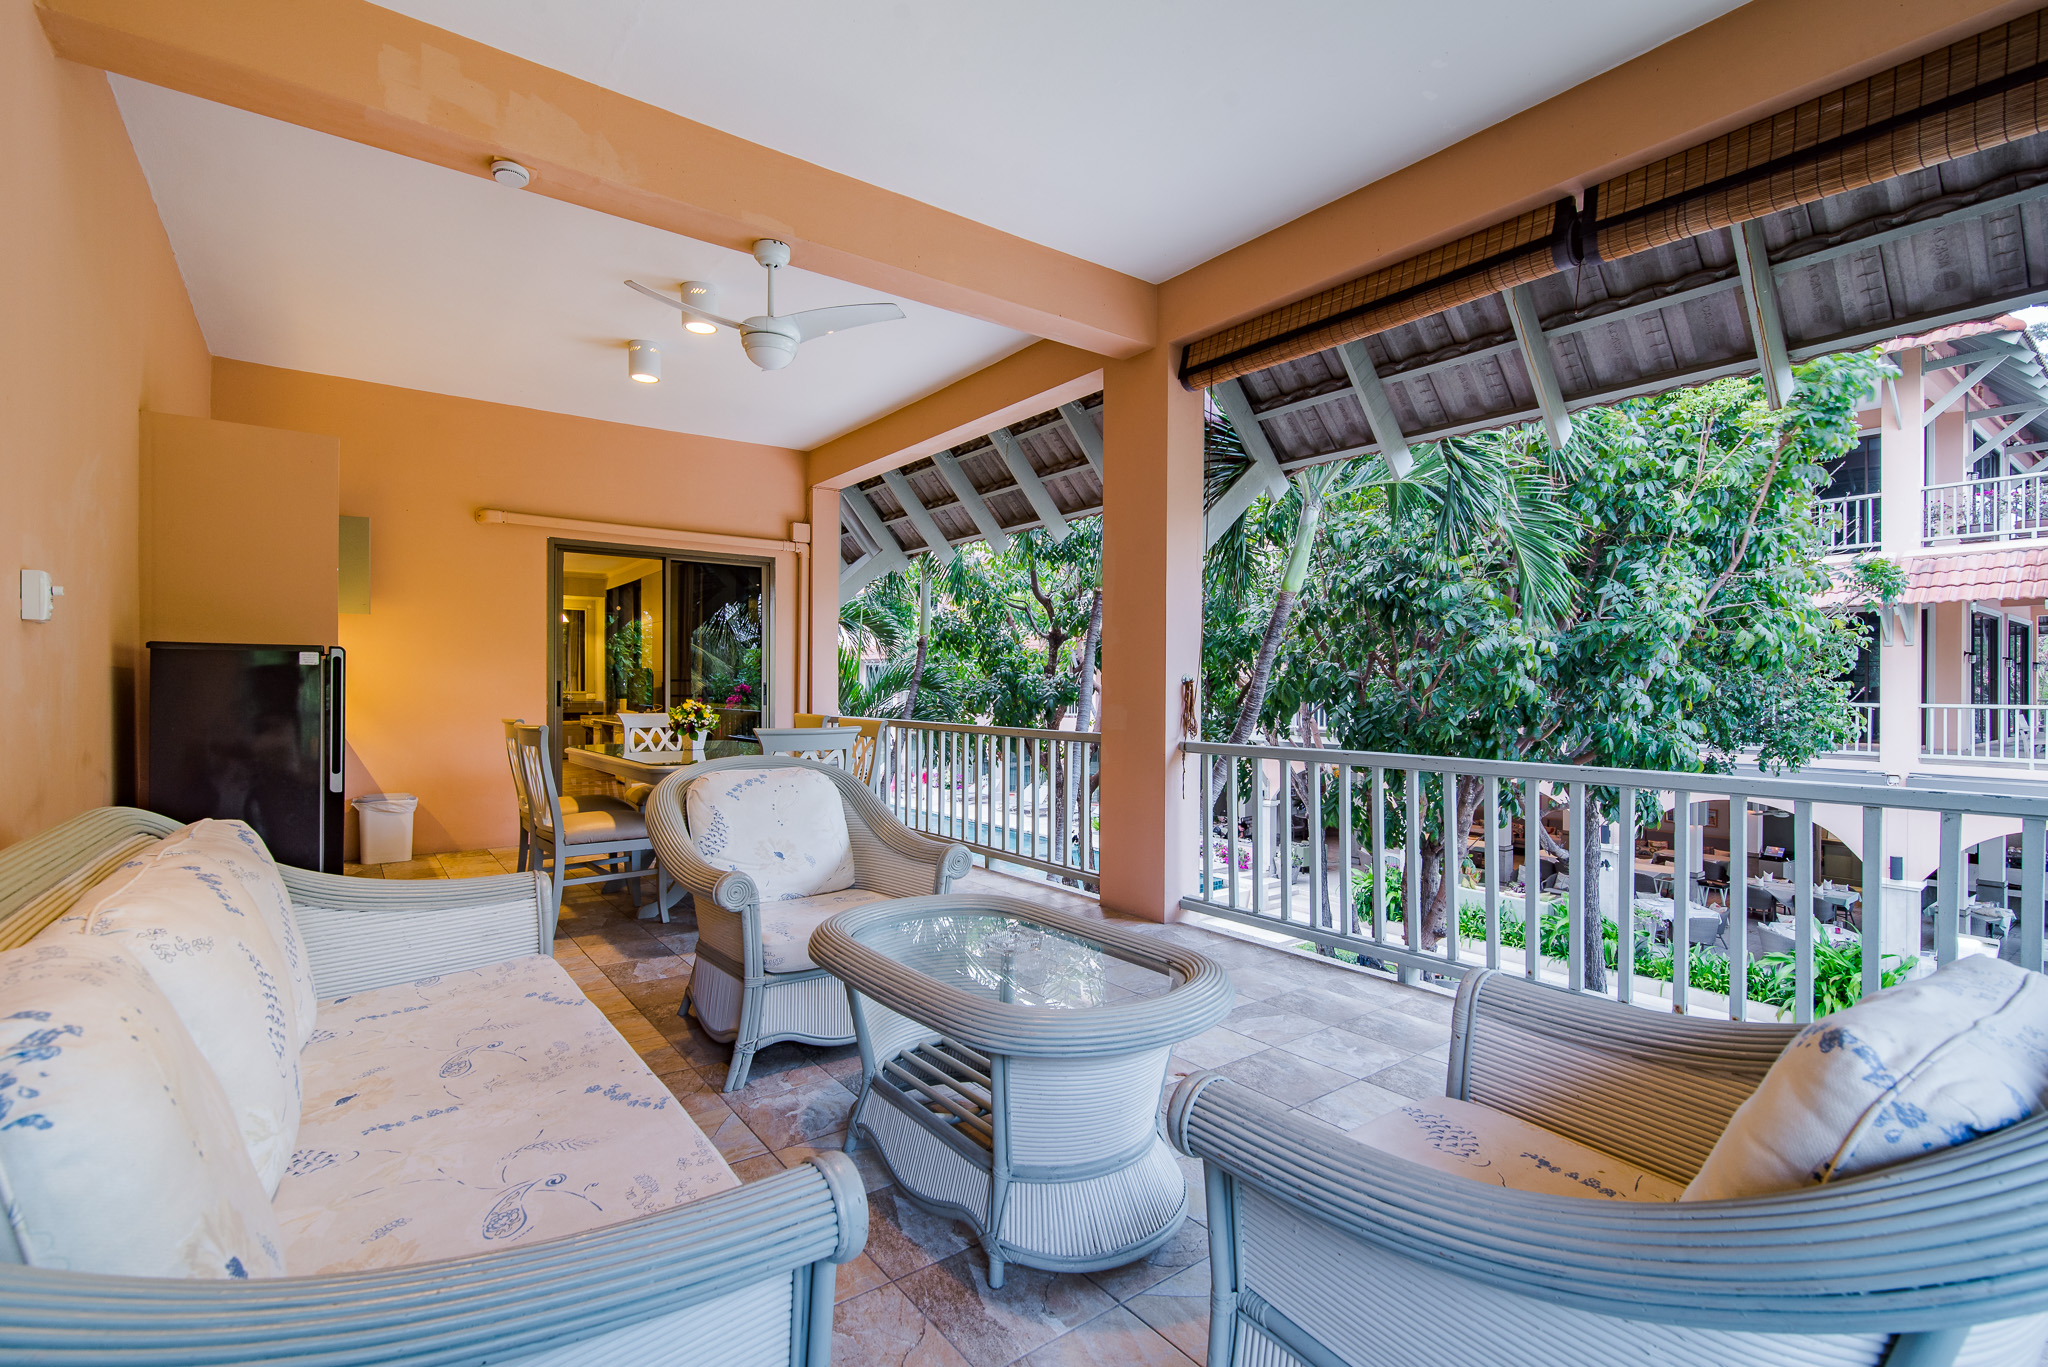 Master bedroom with two queen size beds and the second bedroom with a queen size bed and en suite bathrooms in each. Outdoor dining area and fully equipped kitchen including microwave oven. Terrace furnished with deck furniture and plants facing the sea.